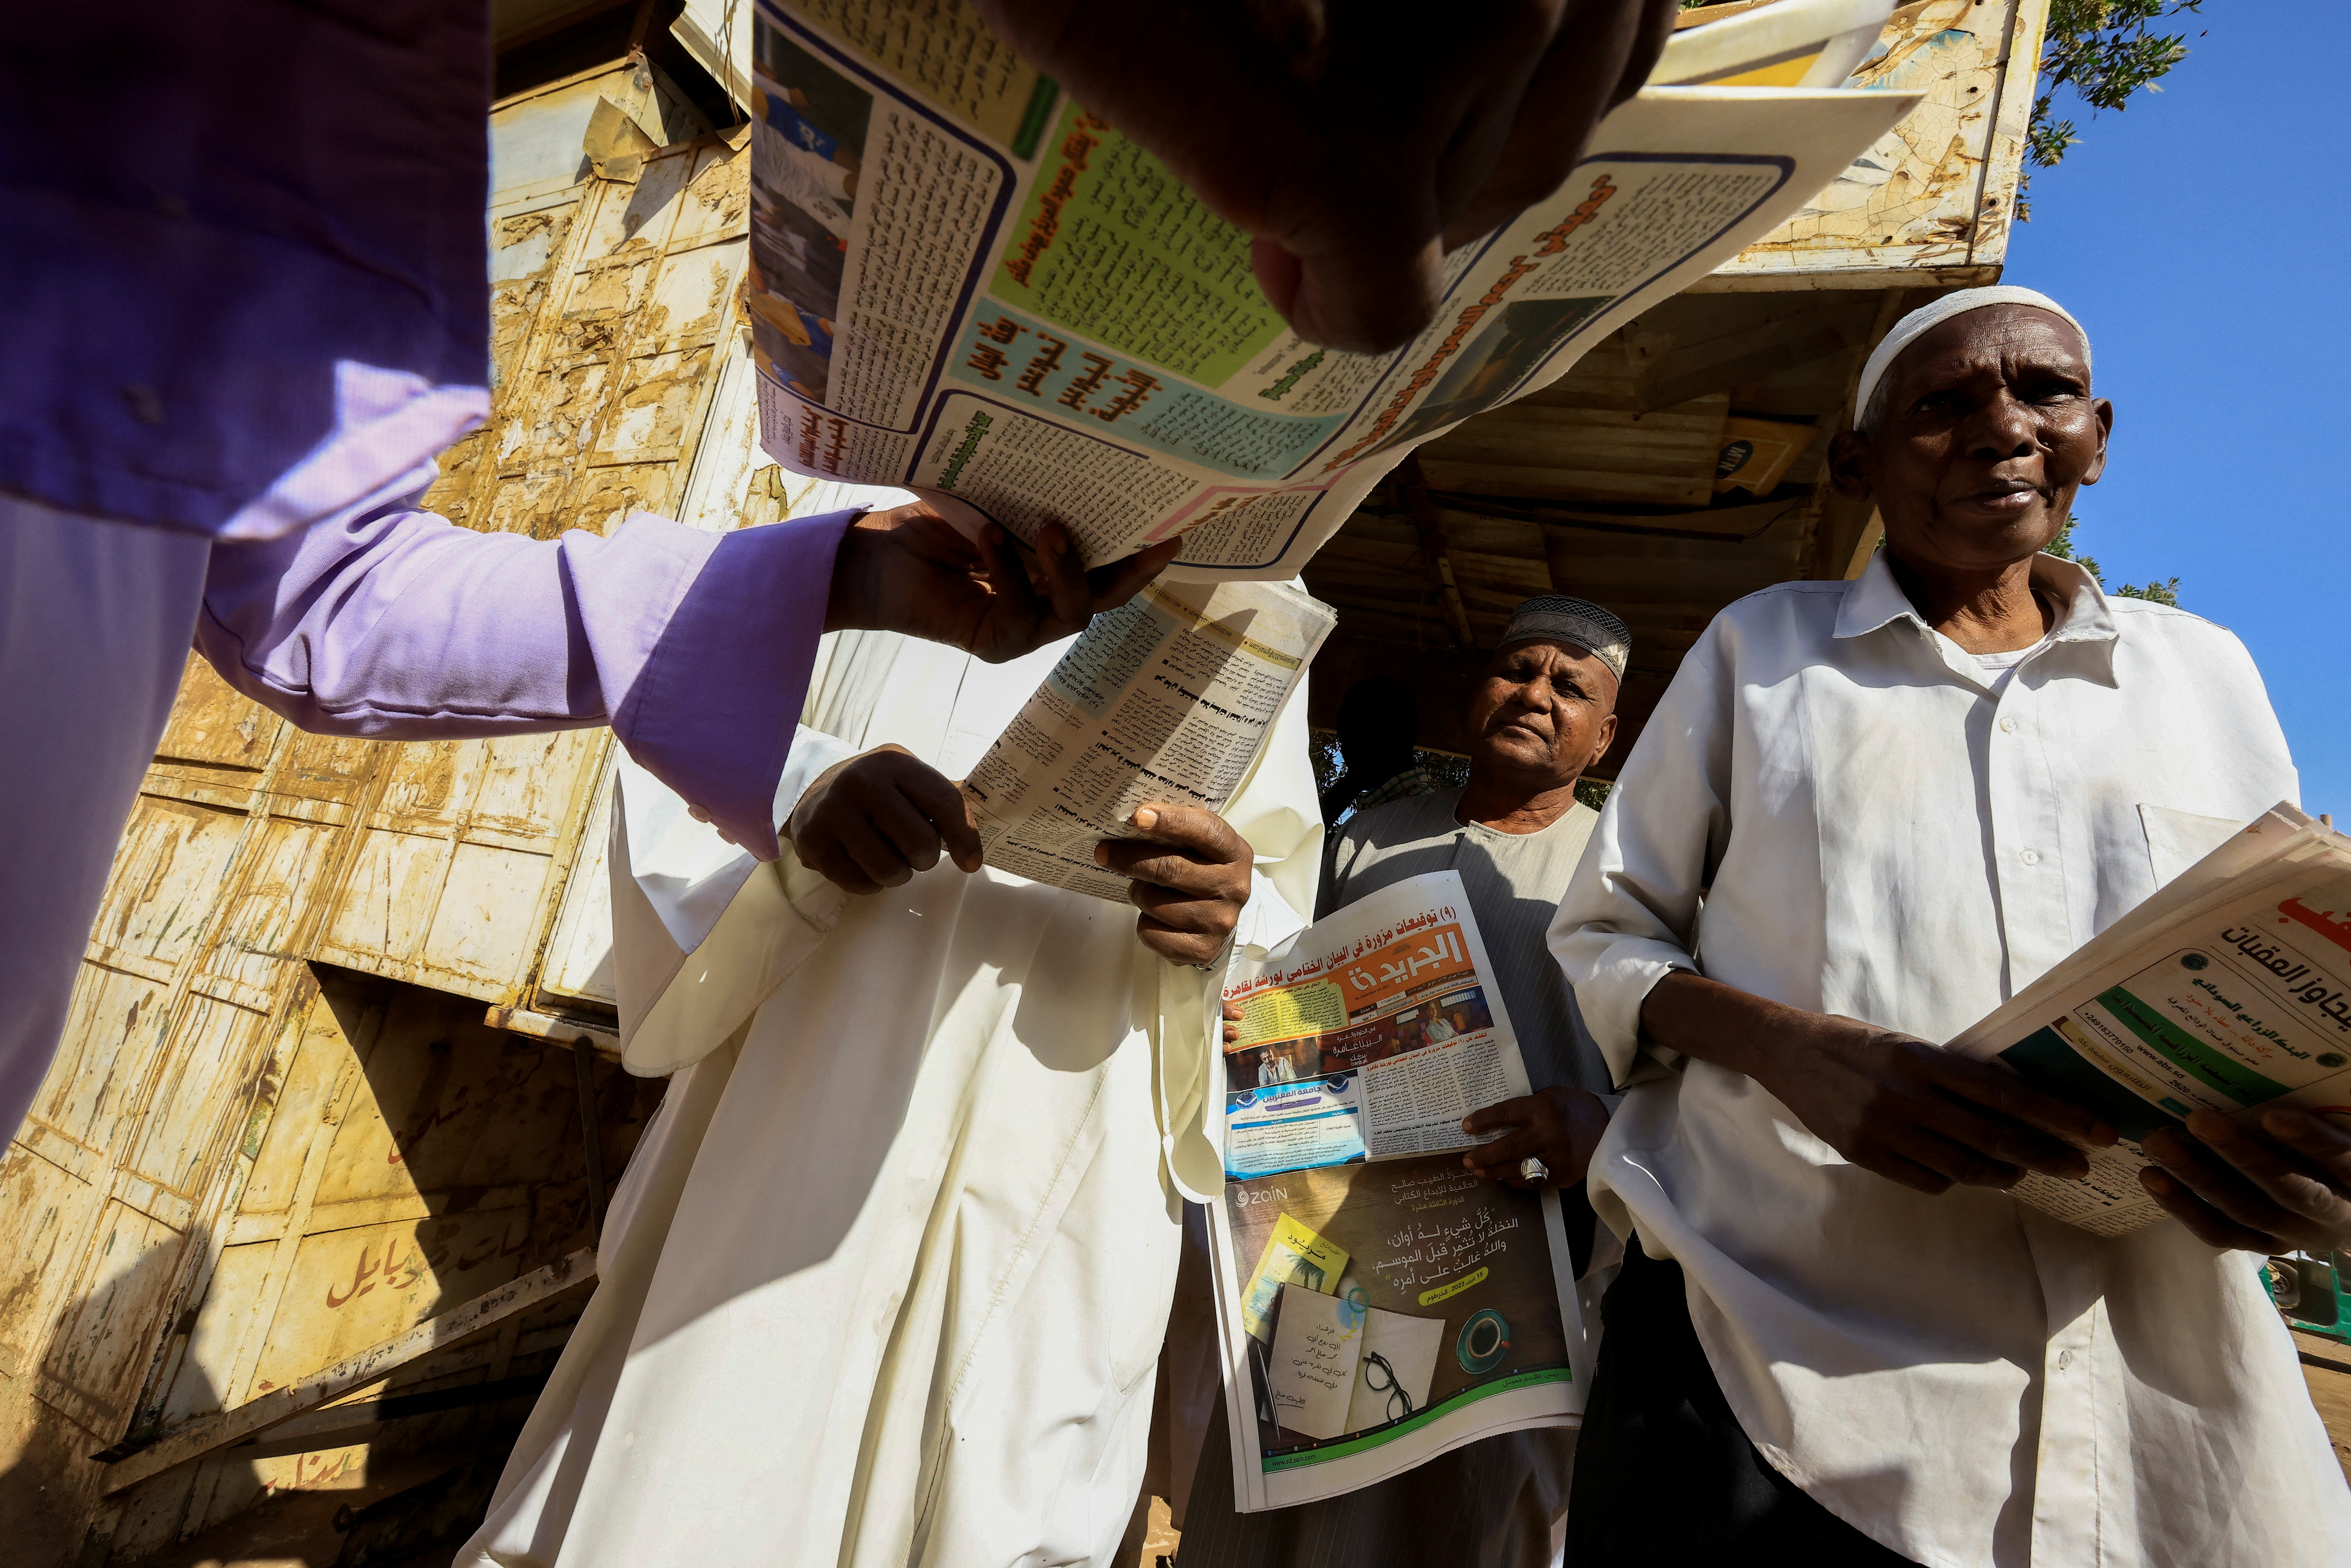 People gather to read and get newspapers at the Al-Zikriyat library in Omdurman